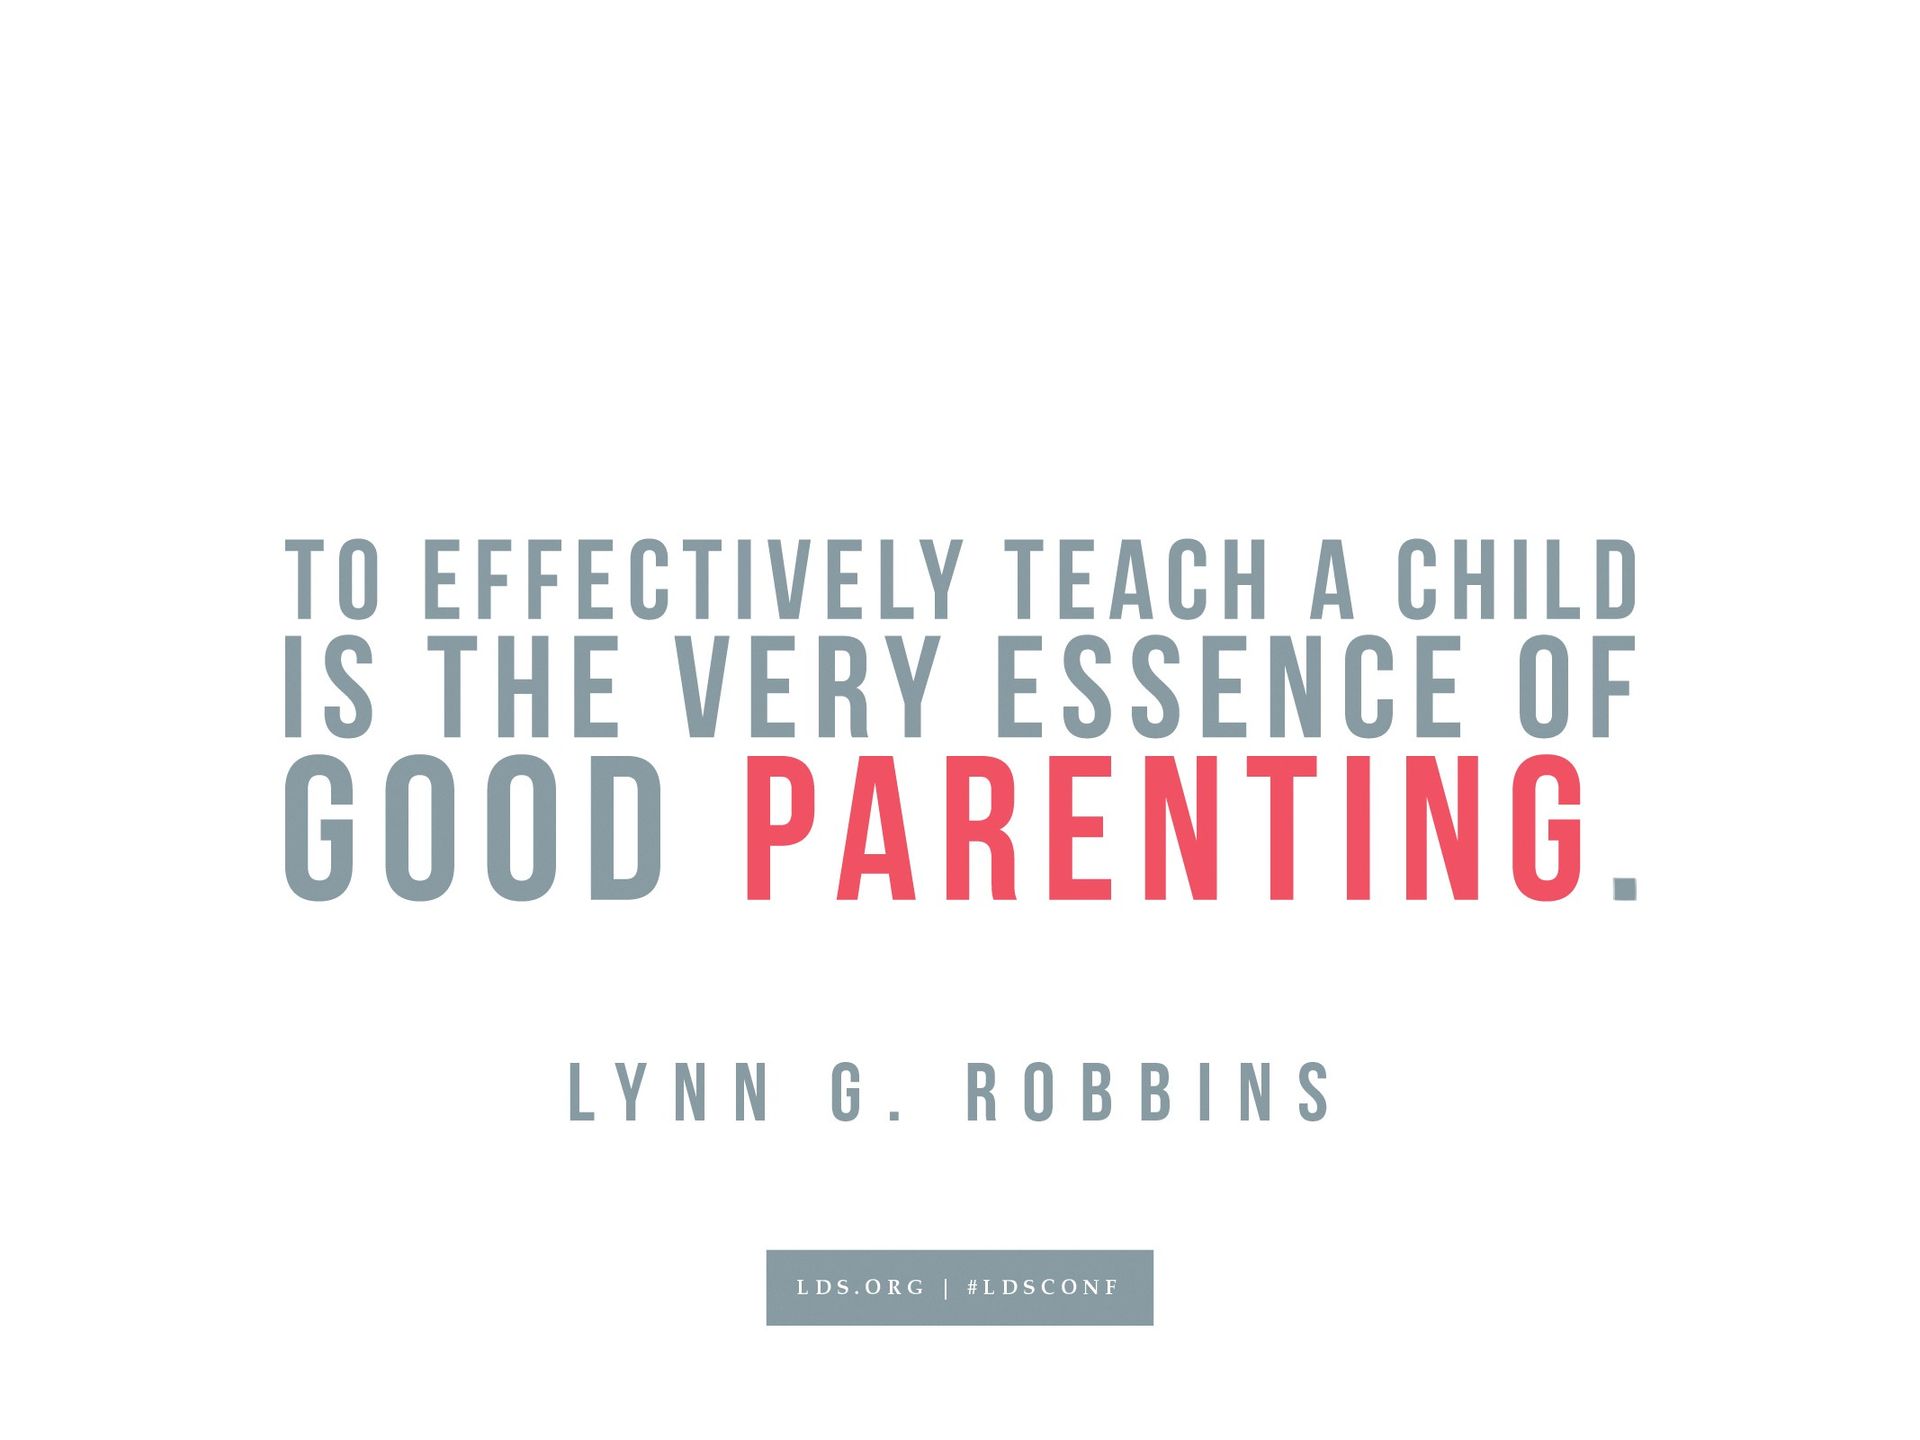 “To effectively teach a child is the very essence of good parenting.”—Lynn G. Robbins, “The Righteous Judge”